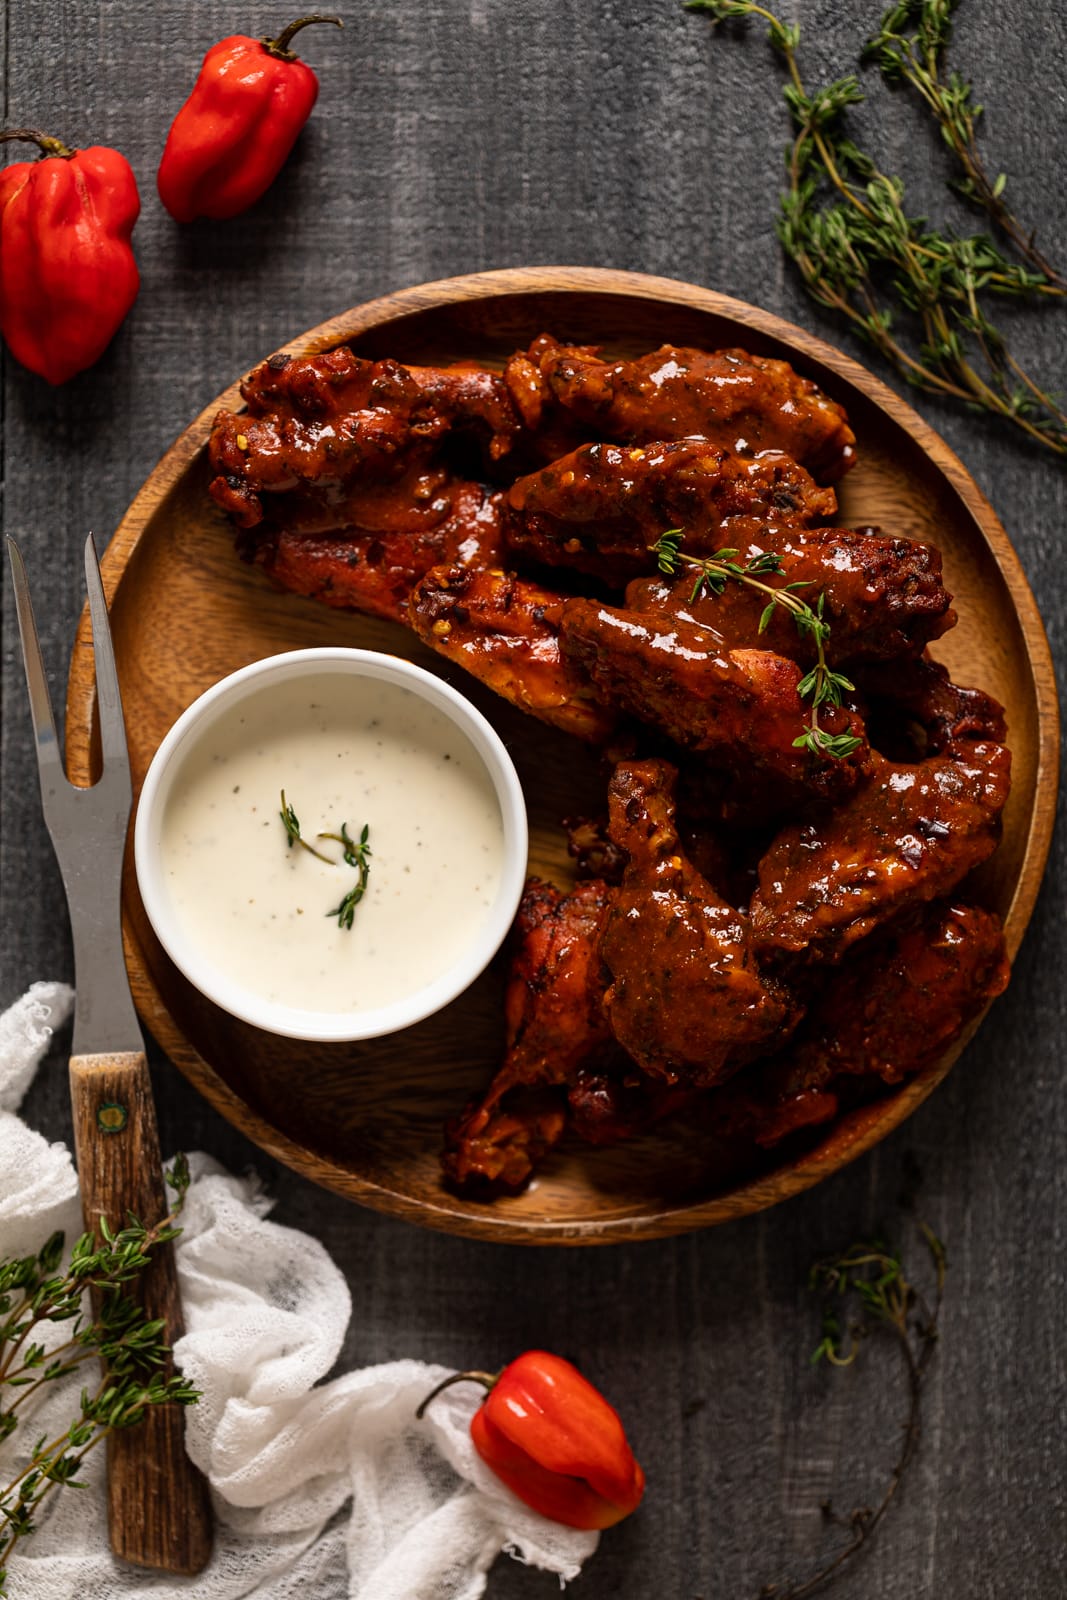 Oven Baked Buffalo Wings on a wooden plate with a small bowl of dip